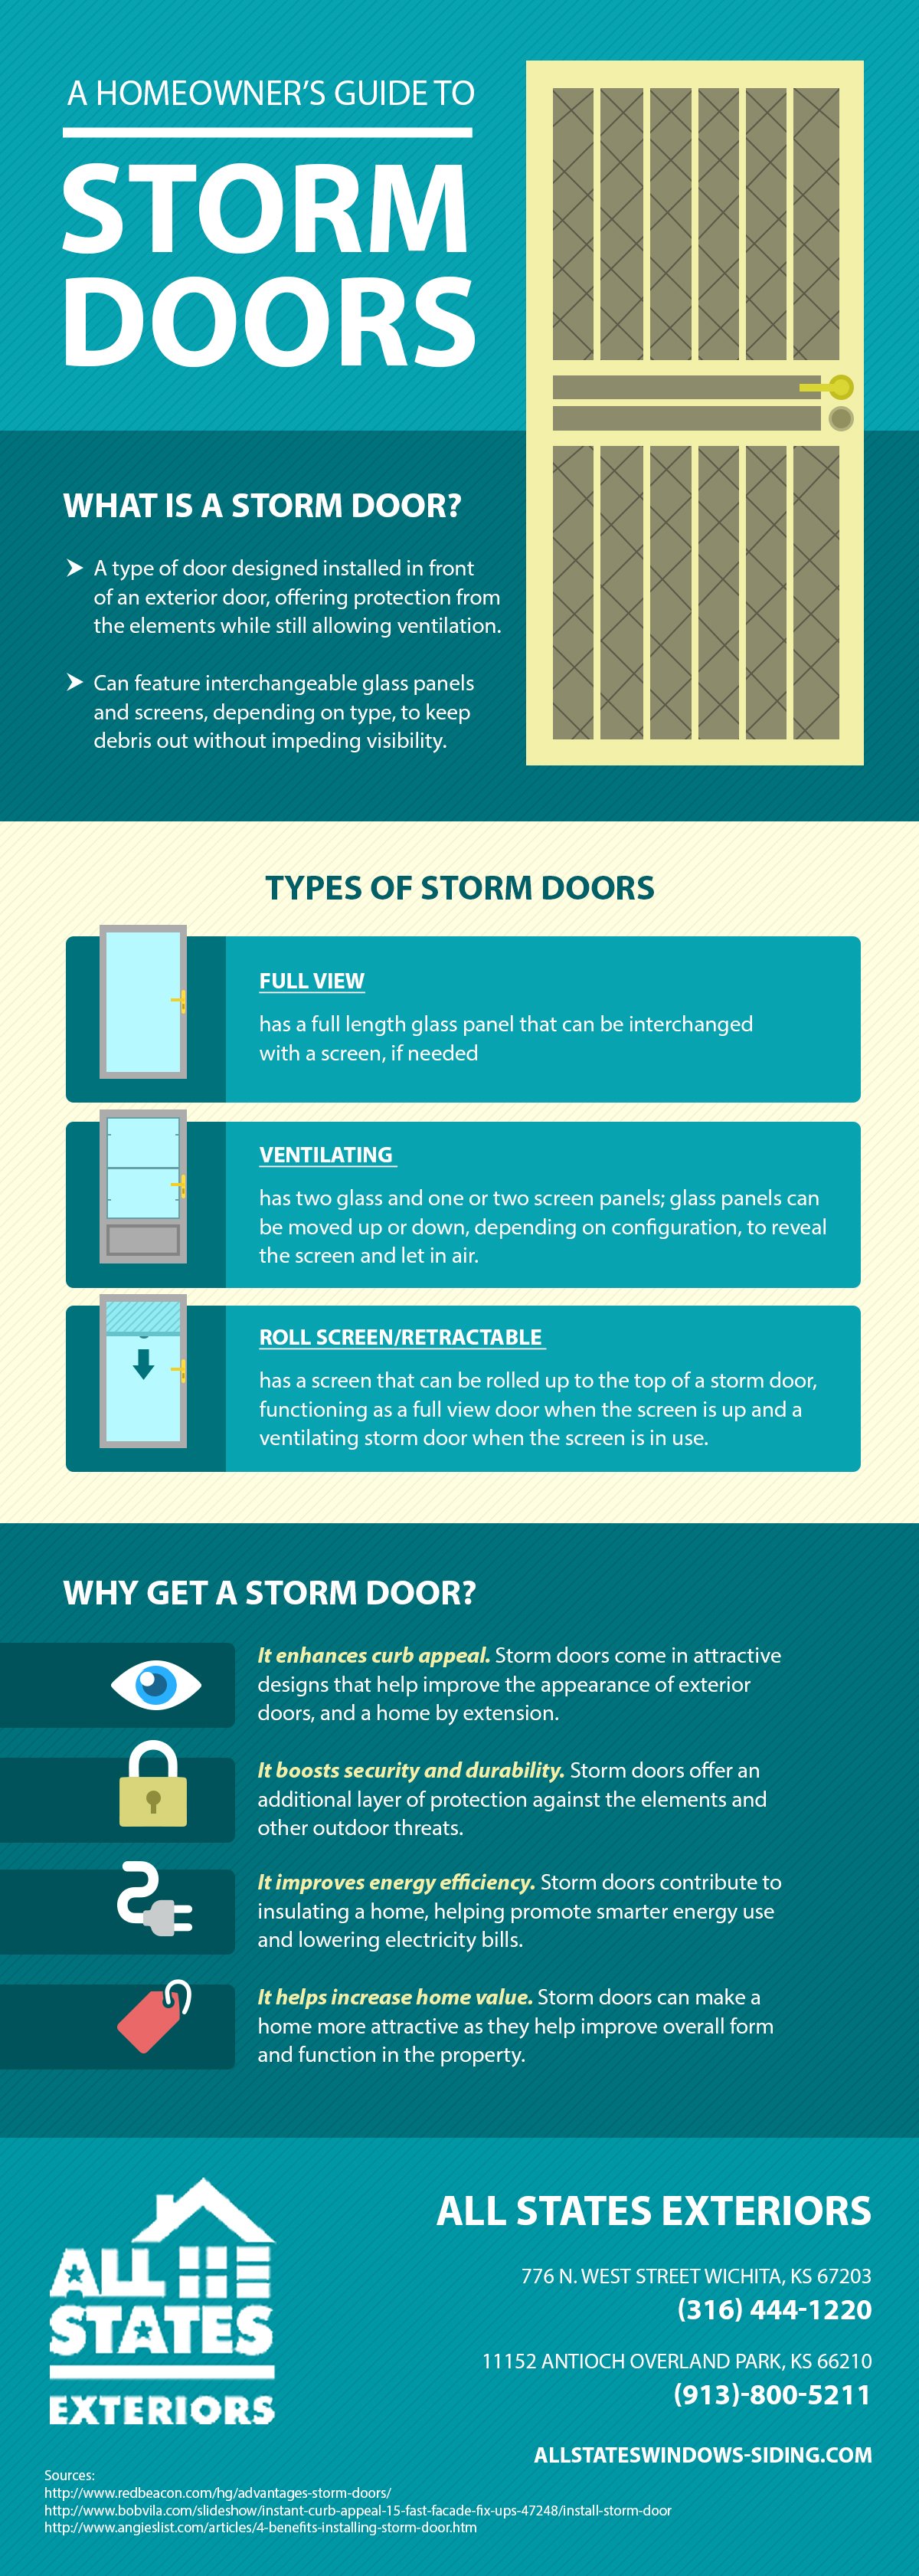 Infographic - AllStatesWindows-Siding.com - A Homeowners Guide to Storm Doors - 10.20.15 (JD) (Dianne) (Paul)